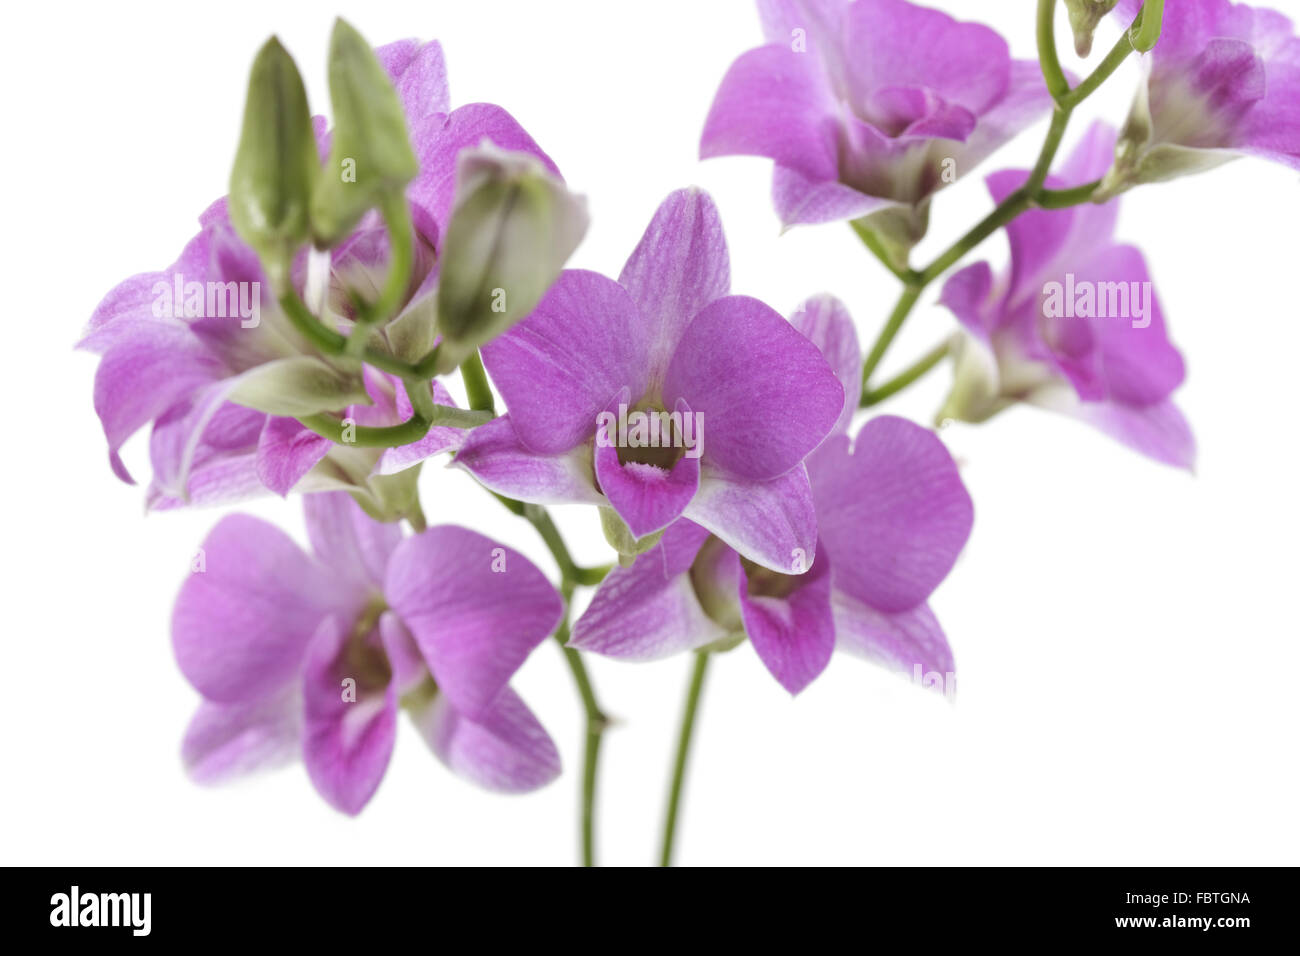 Dendrobium orchid flower spikes of Compactum Stock Photo